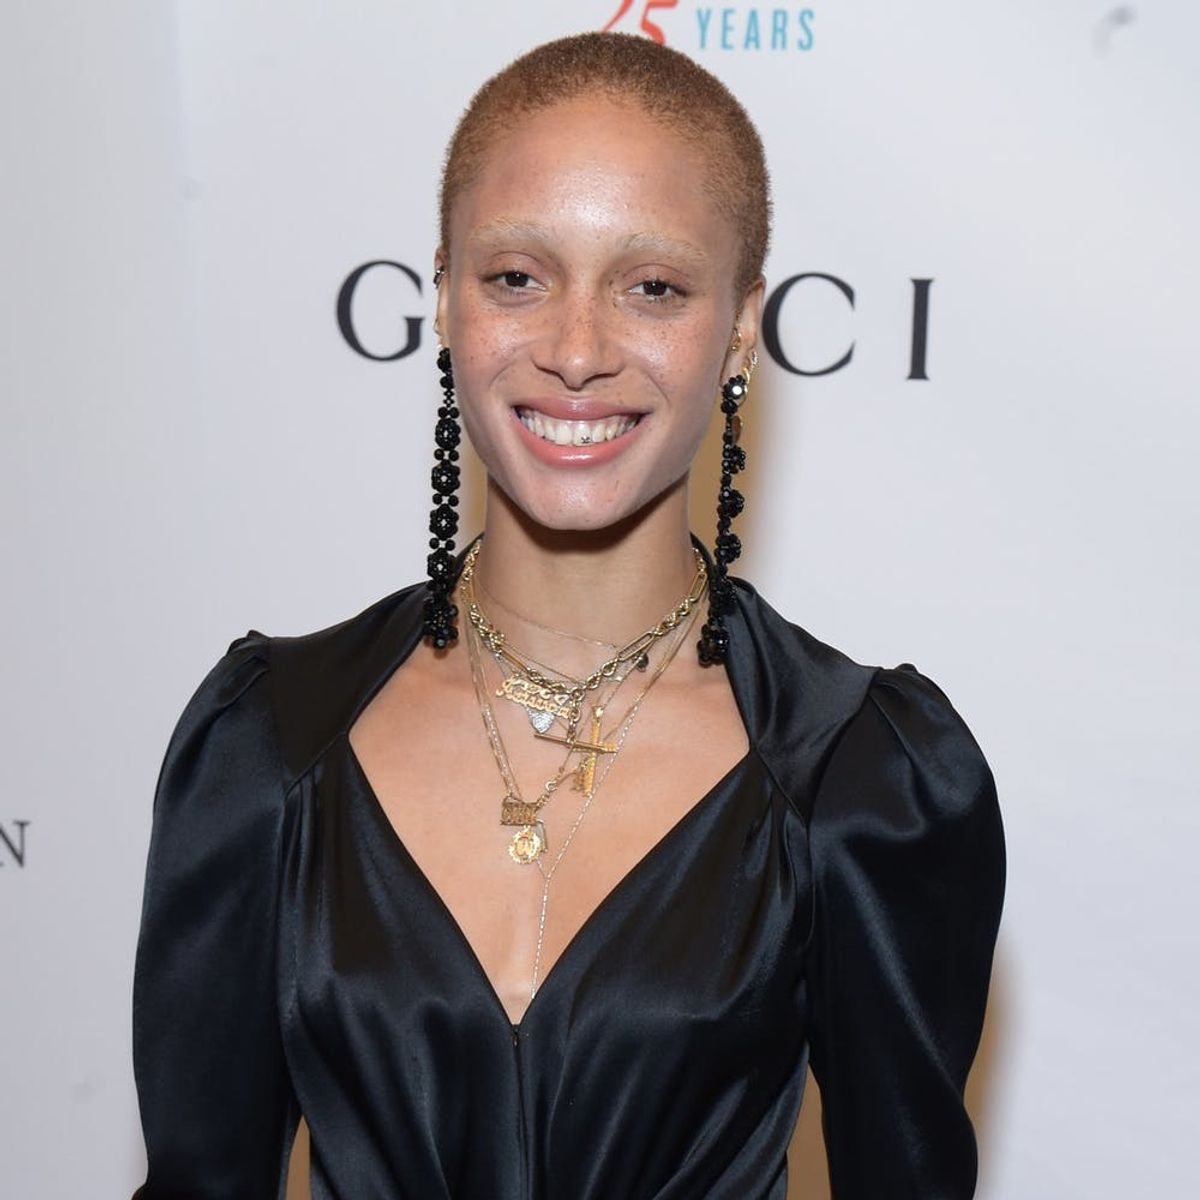 Why You’re About to See Model and Activist Adwoa Aboah Everywhere